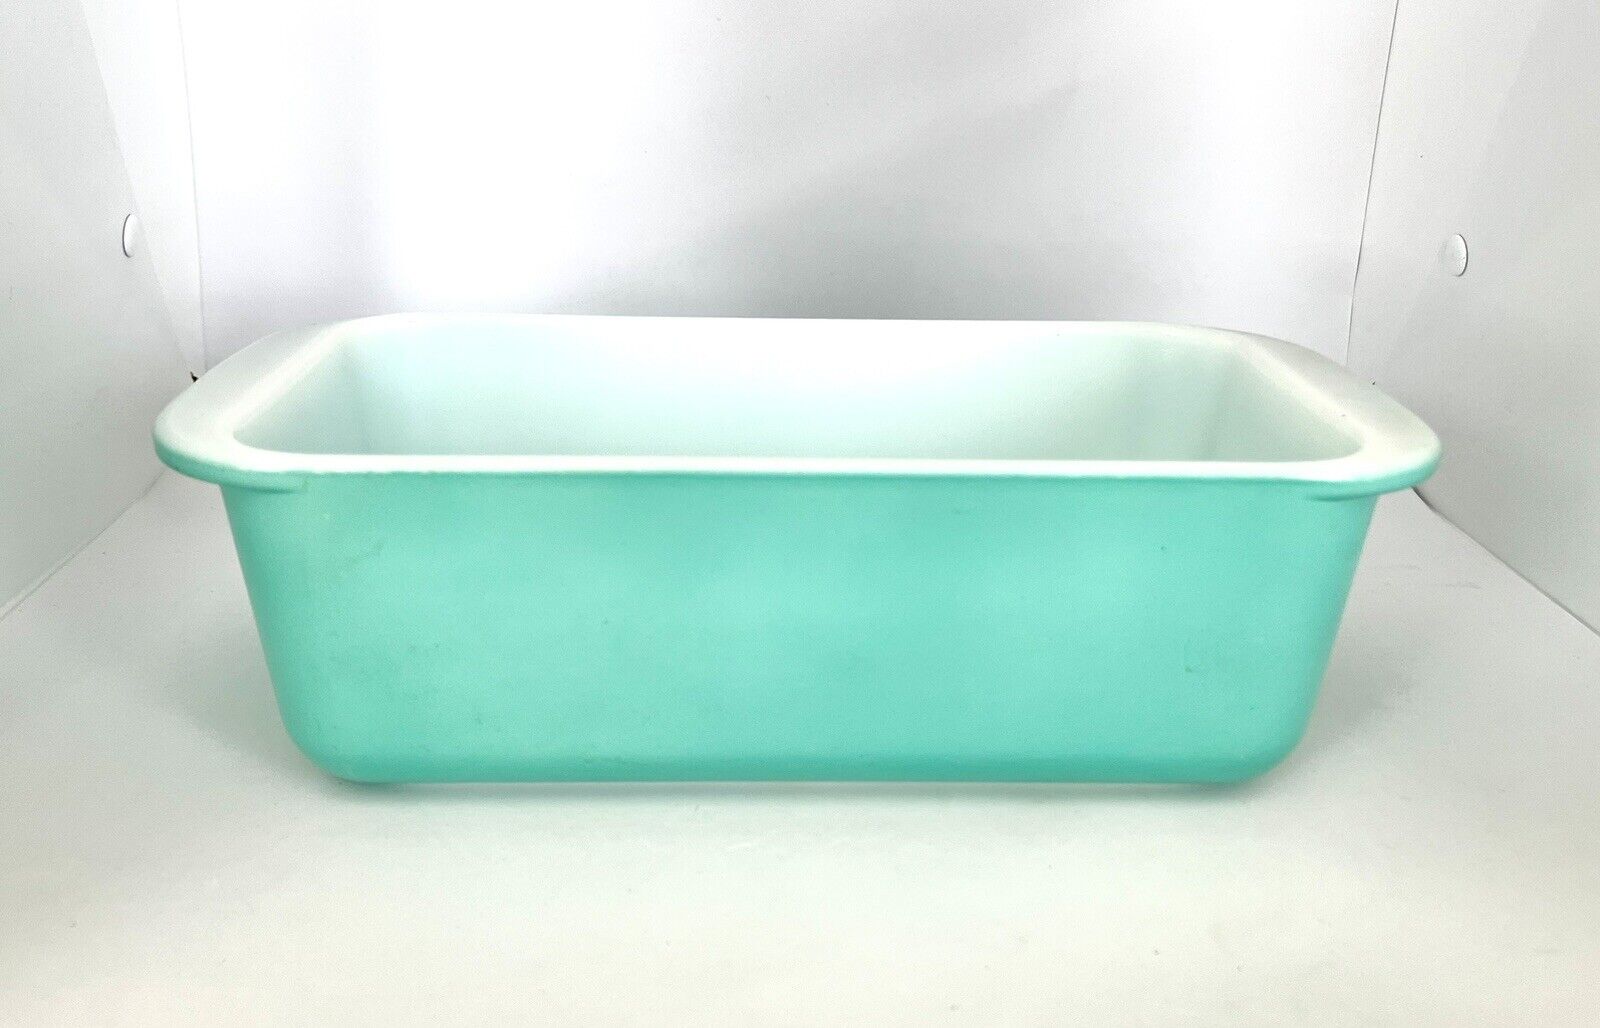 Vintage Pyrex Bread Loaf Pan #213 Turquoise Blue 1.5qt Ovenware Made In USA